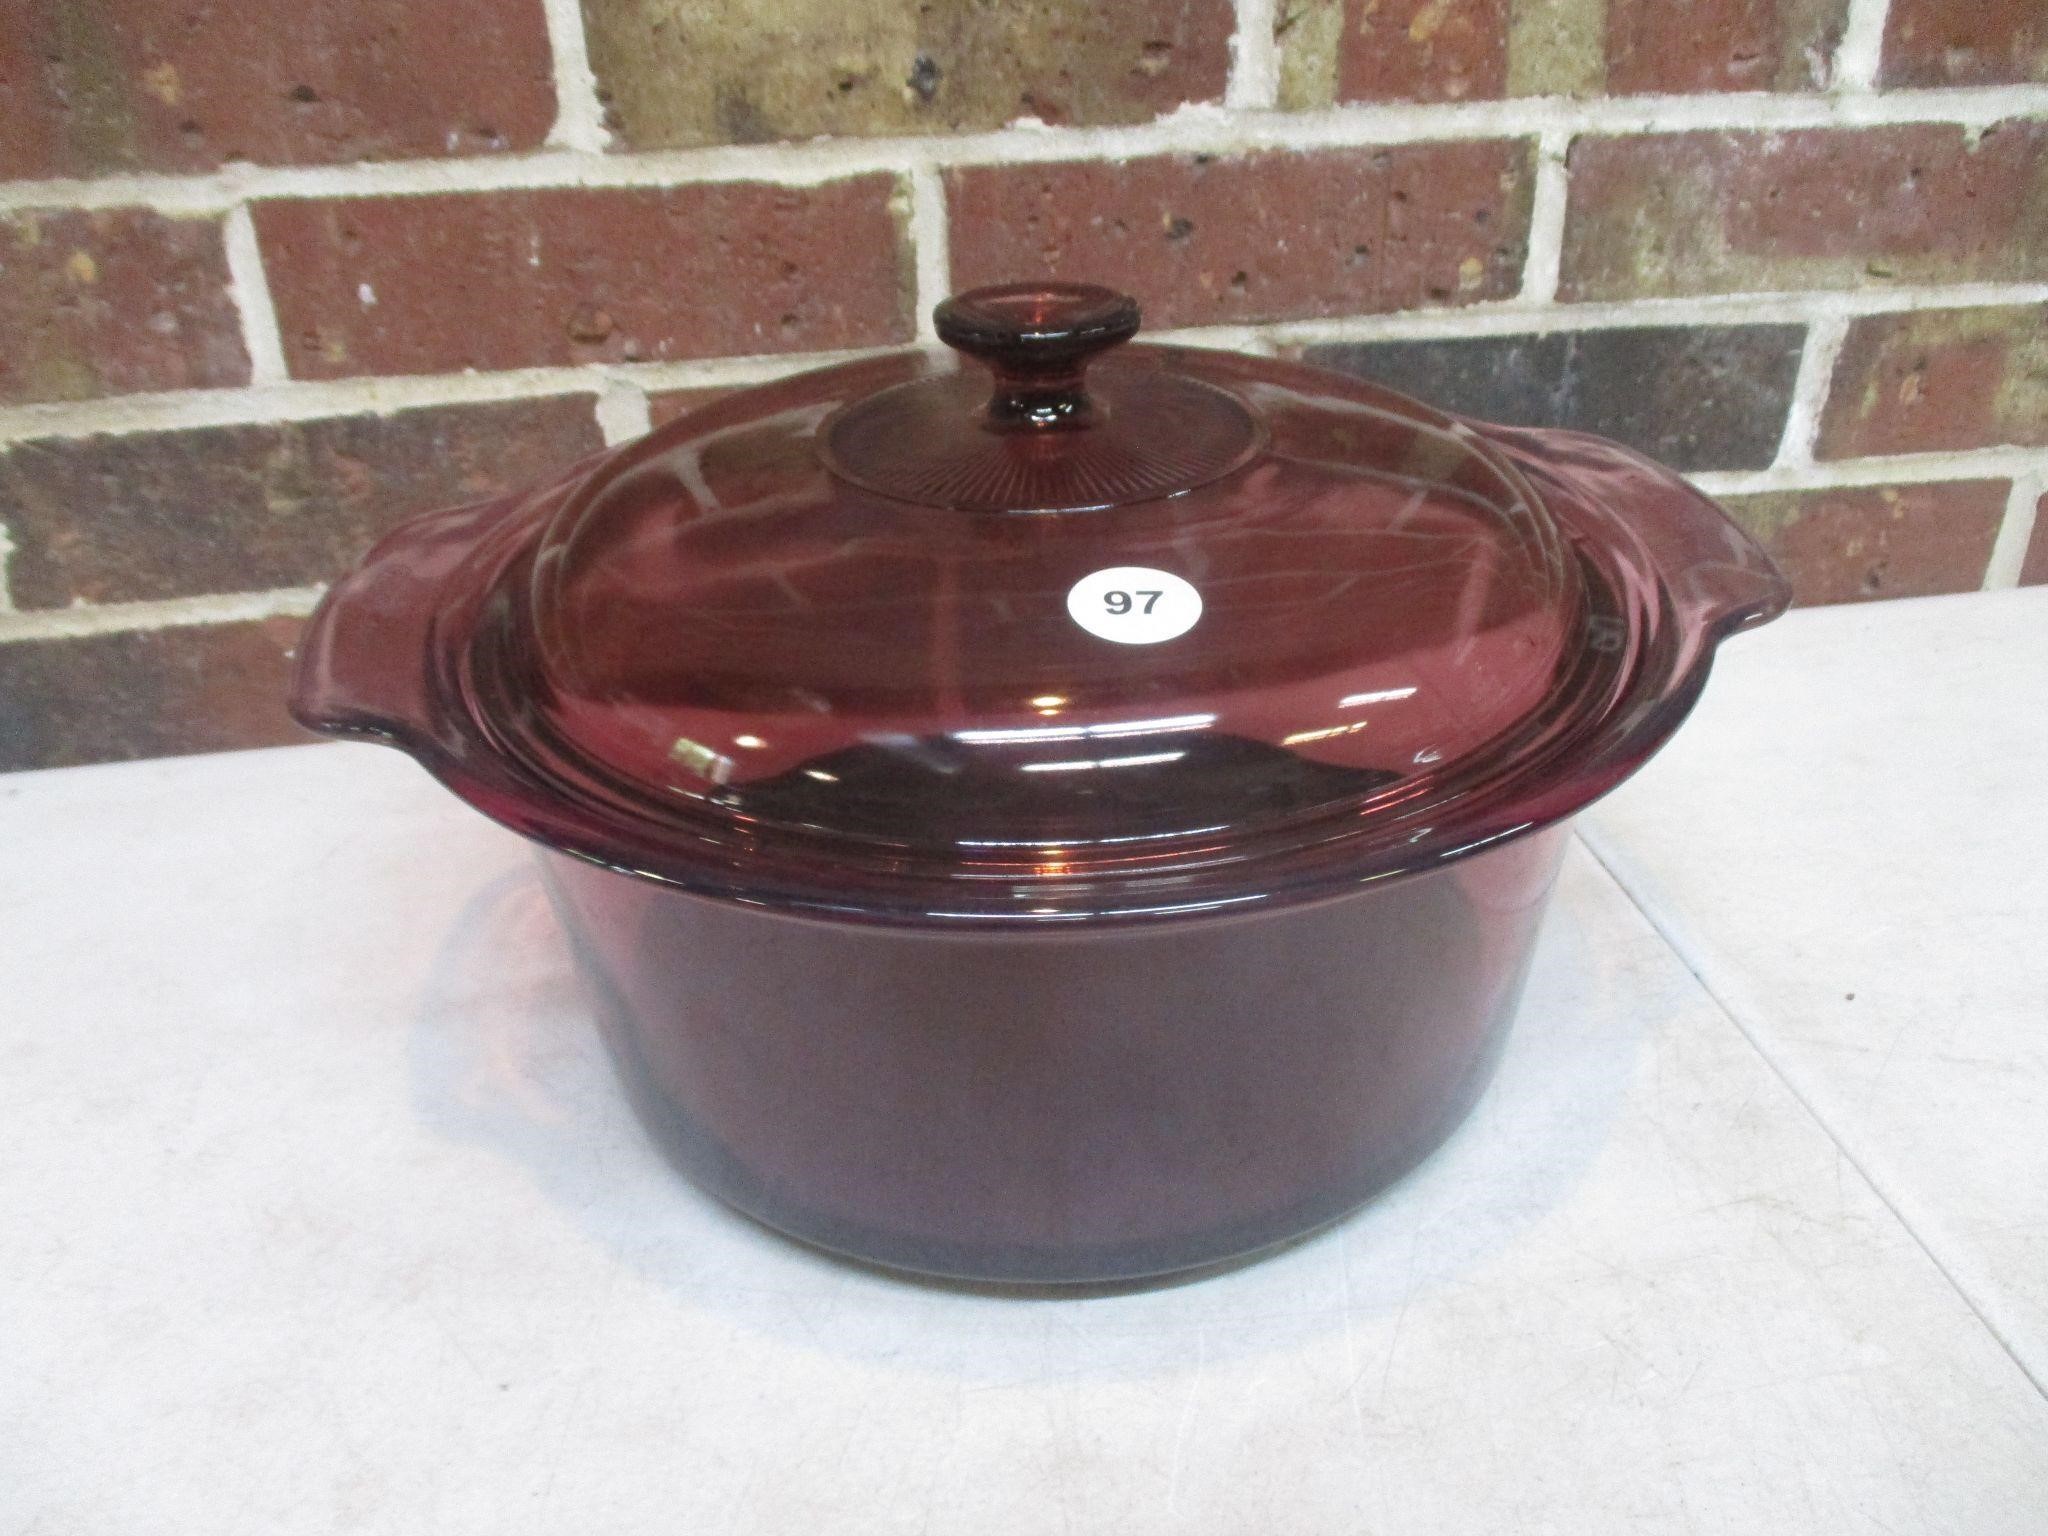 Vision Ware 5L Casserole Dish with Lid